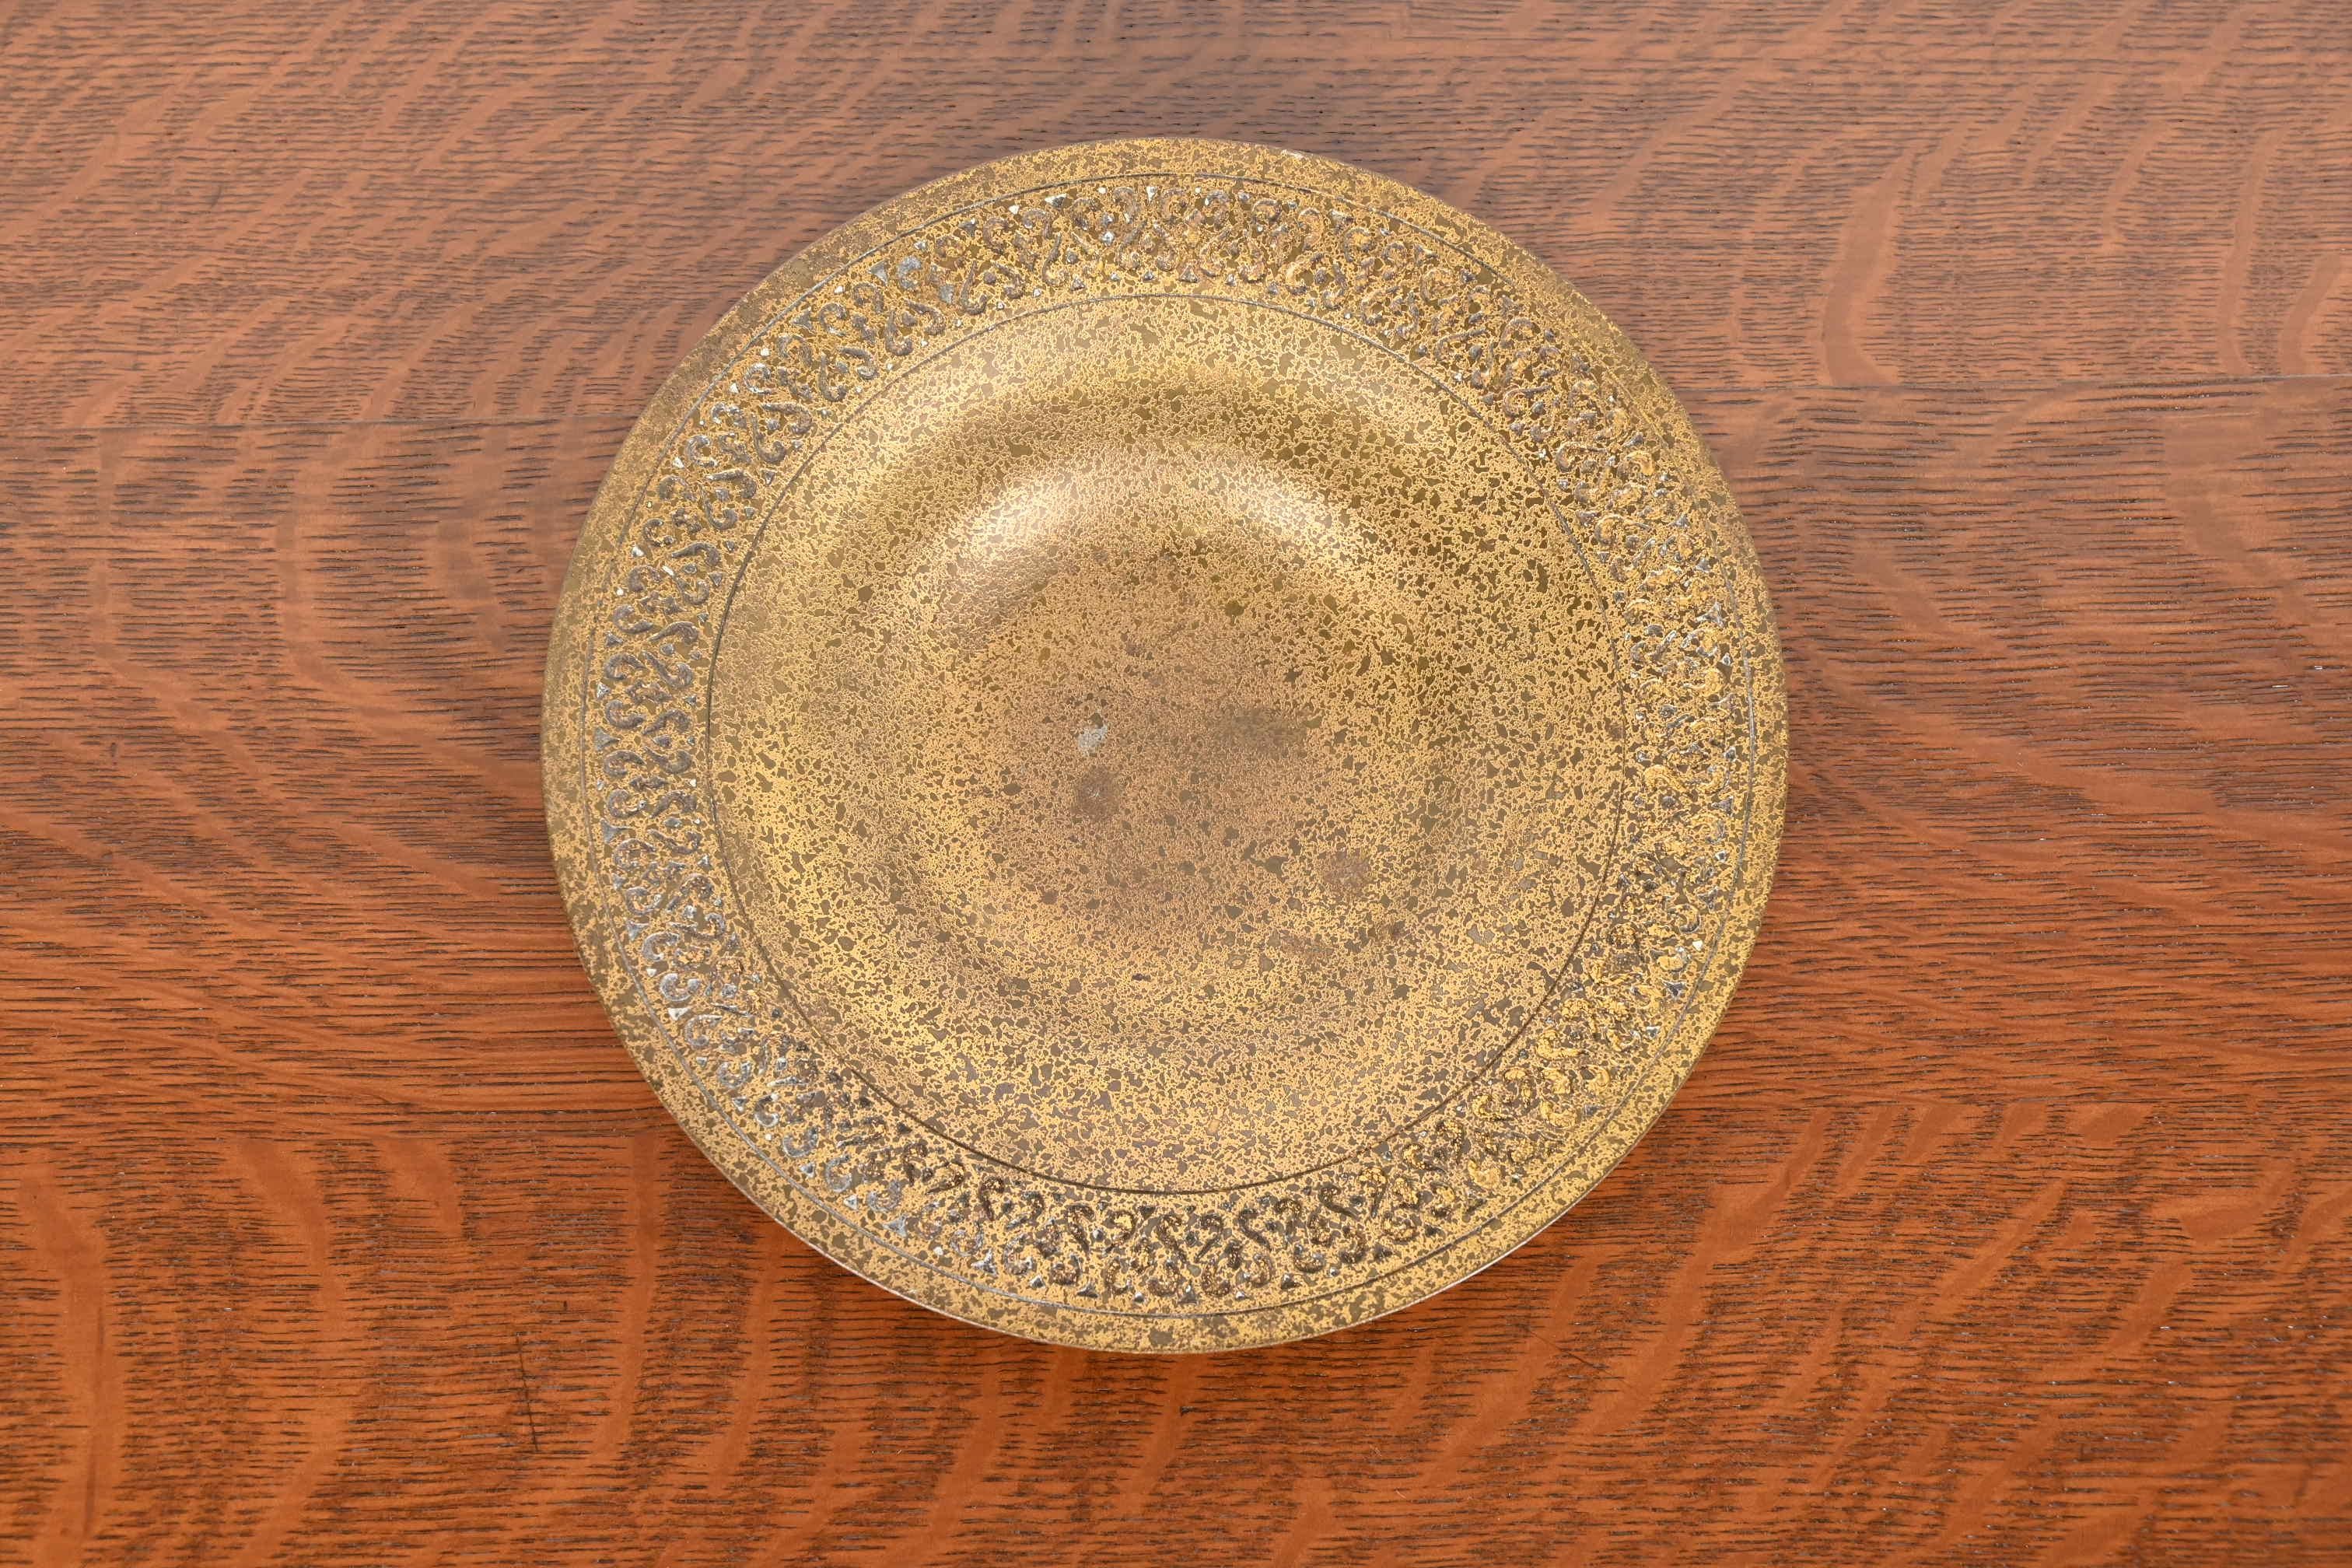 Tiffany Studios New York Bronze Doré Bowl In Good Condition For Sale In South Bend, IN